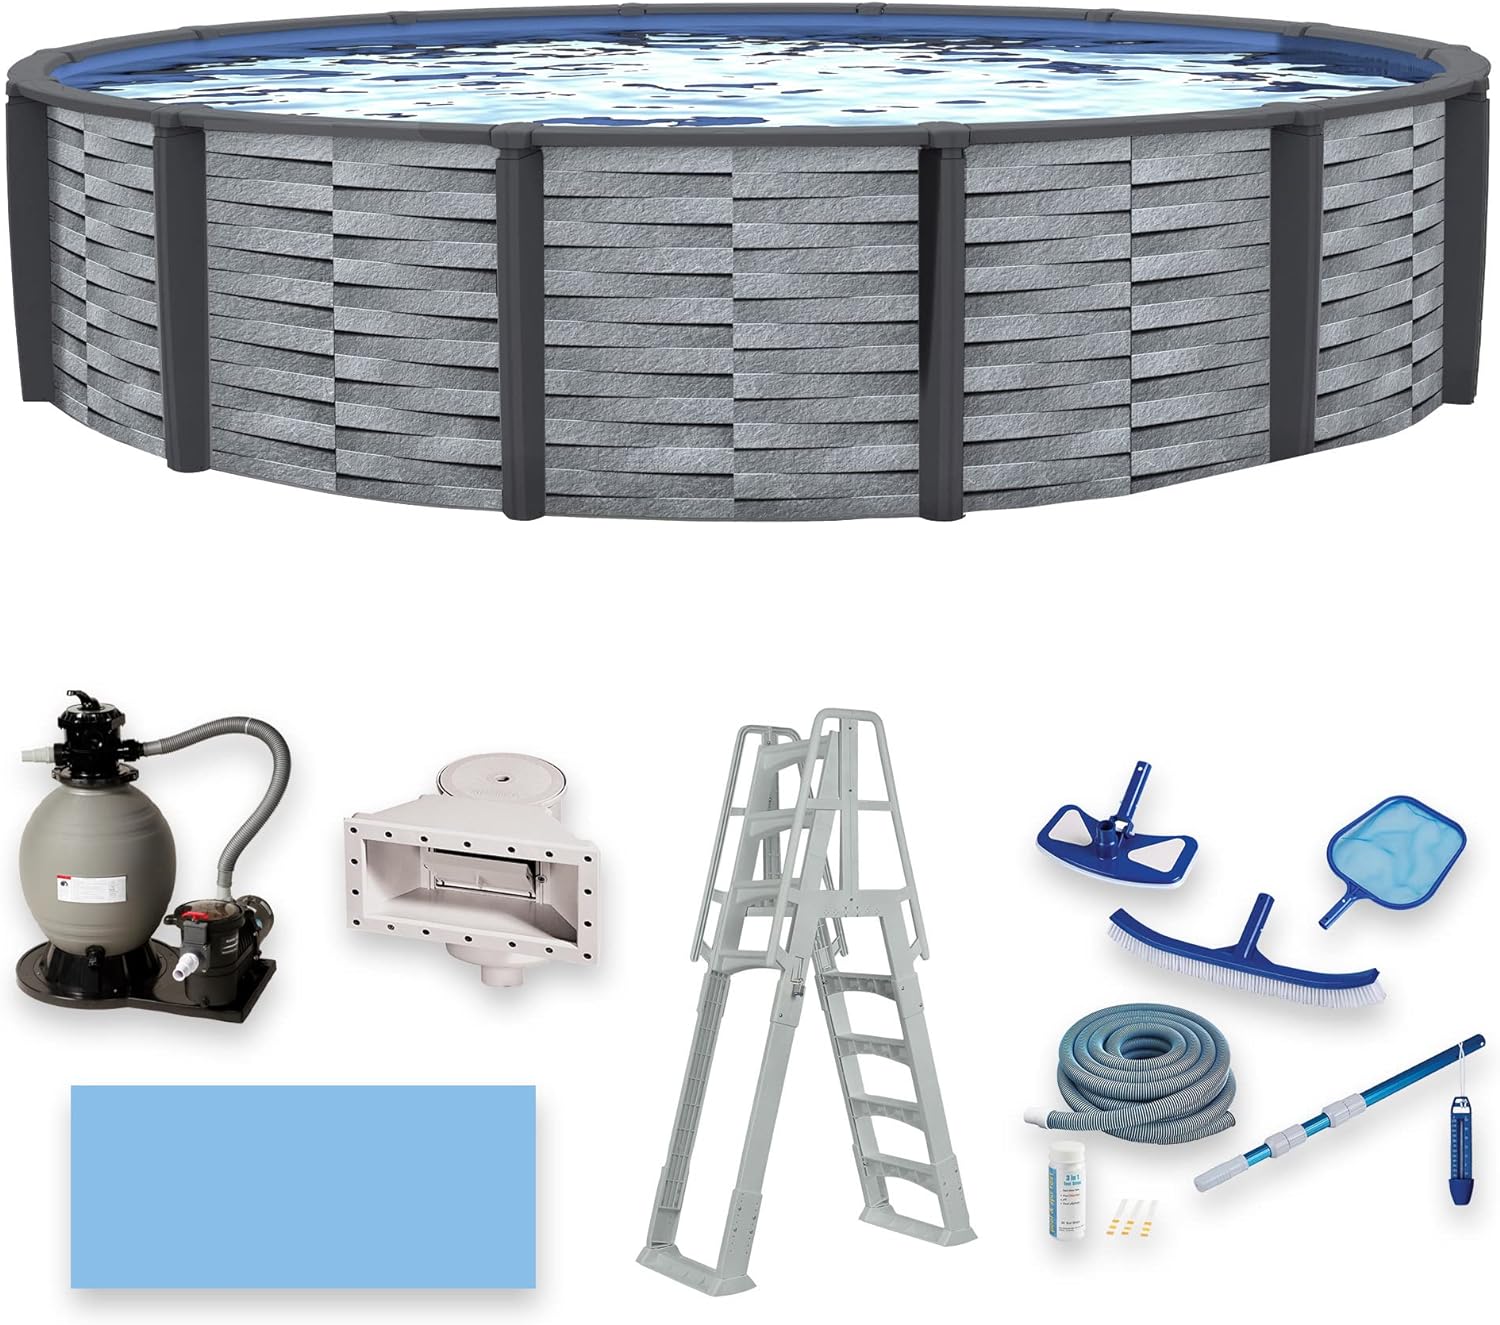 Affinity 27' Round 52" Deep 7" Top Rail Resin Above Ground Swimming Pool Package